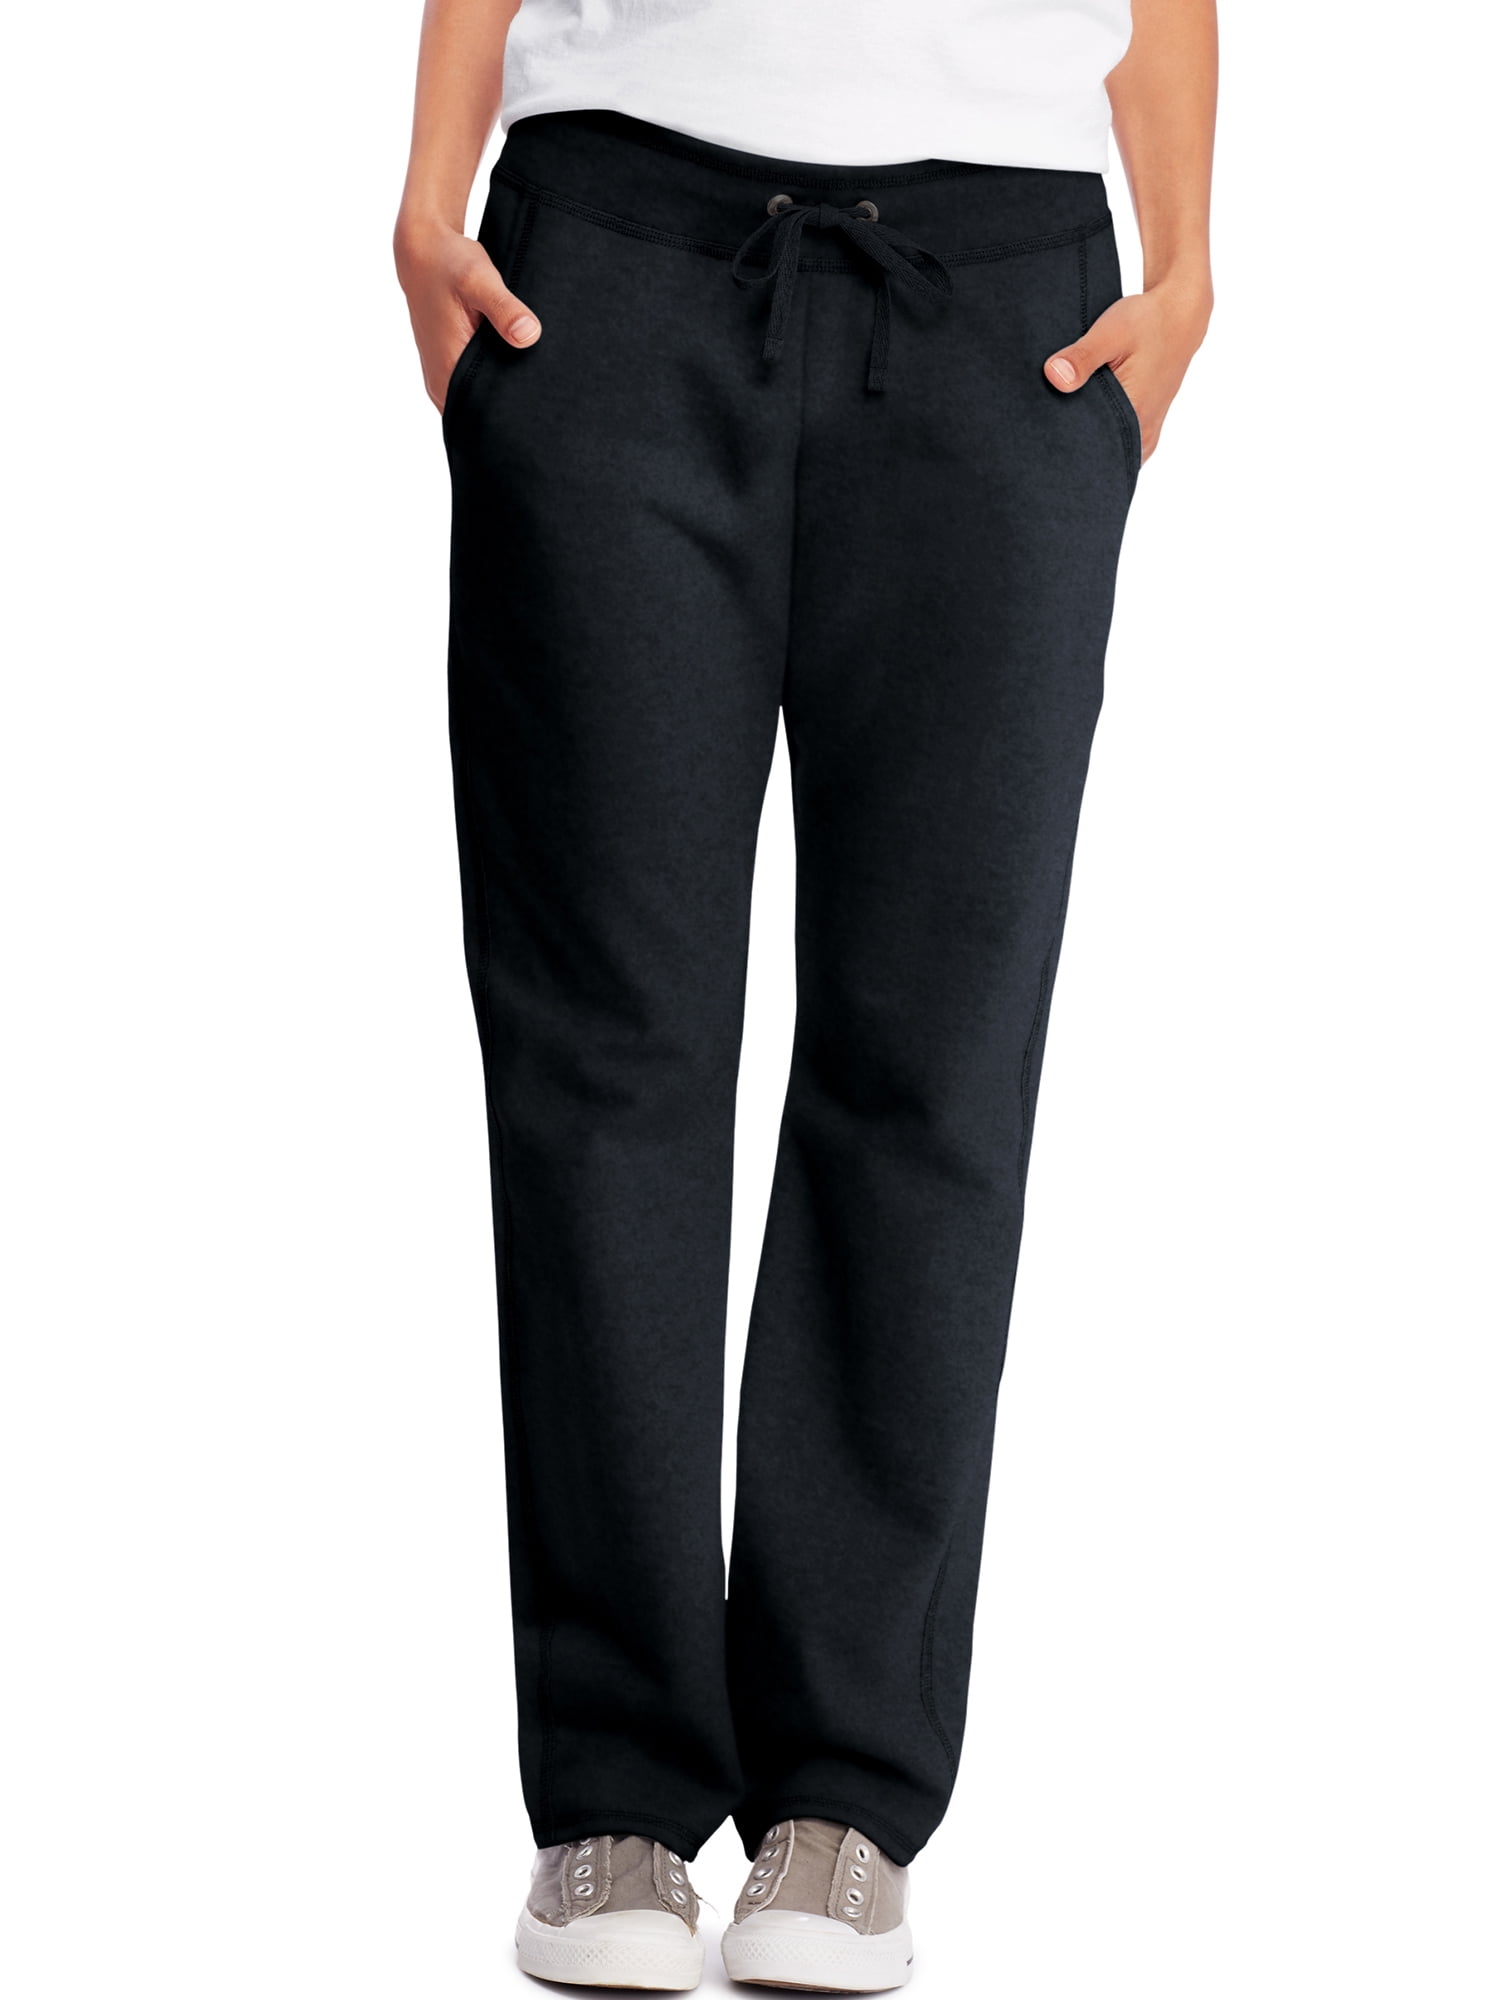 Hanes Women's French Terry Cloth Pants with Pockets, 30” Inseam, Sizes ...